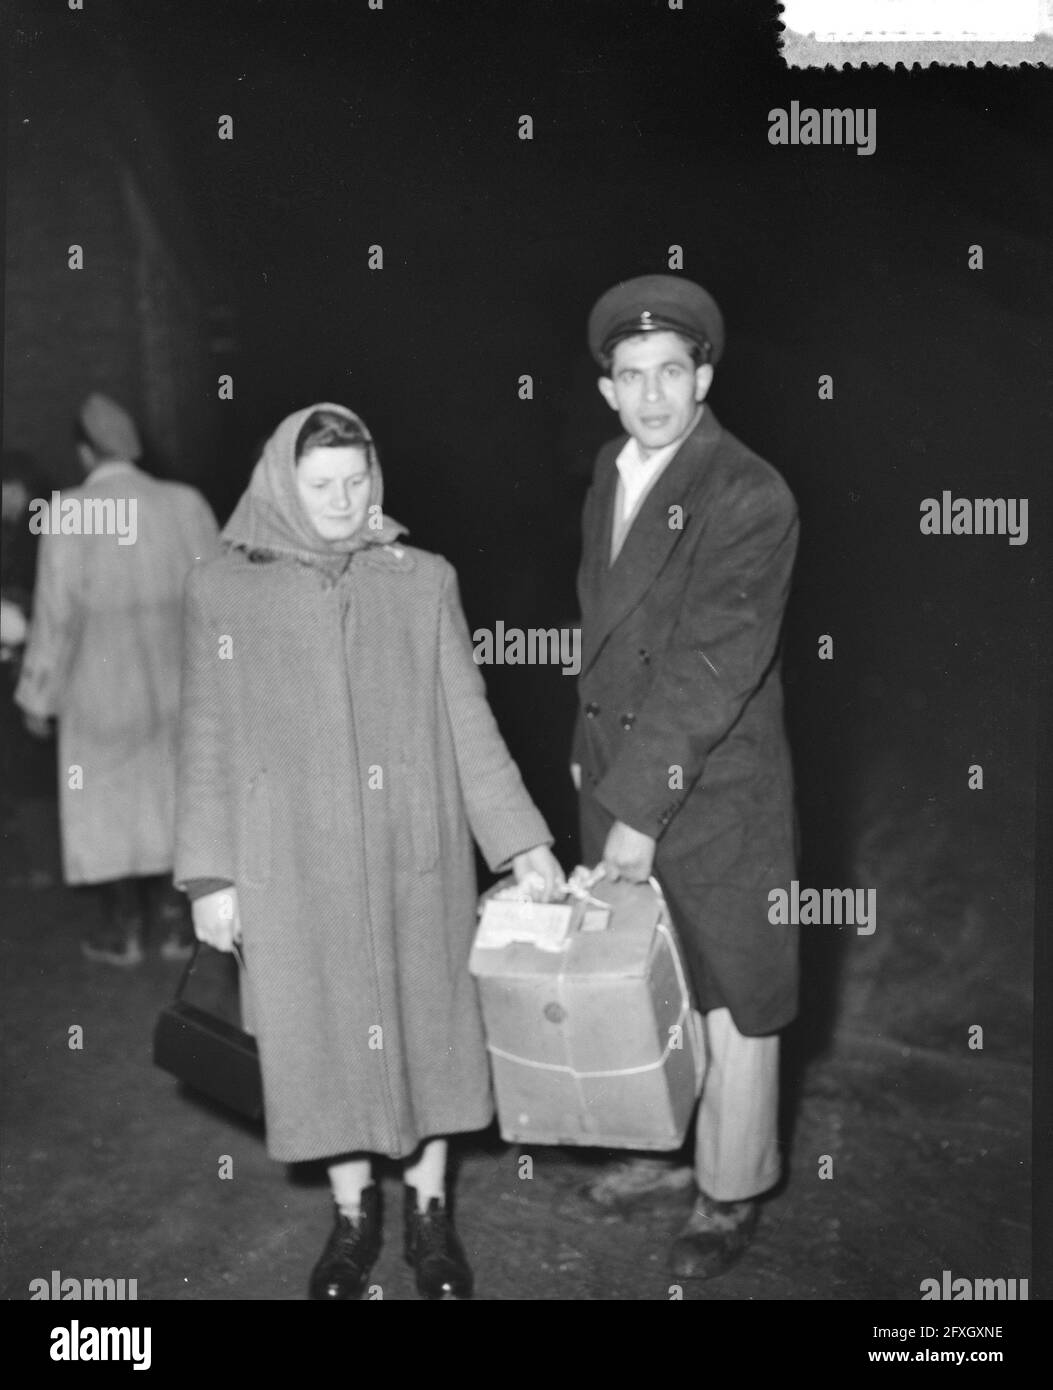 Refugees across the Hungarian border near Nickelsdorf. at night, October 30, 1956, Fugitives, The Netherlands, 20th century press agency photo, news to remember, documentary, historic photography 1945-1990, visual stories, human history of the Twentieth Century, capturing moments in time Stock Photo